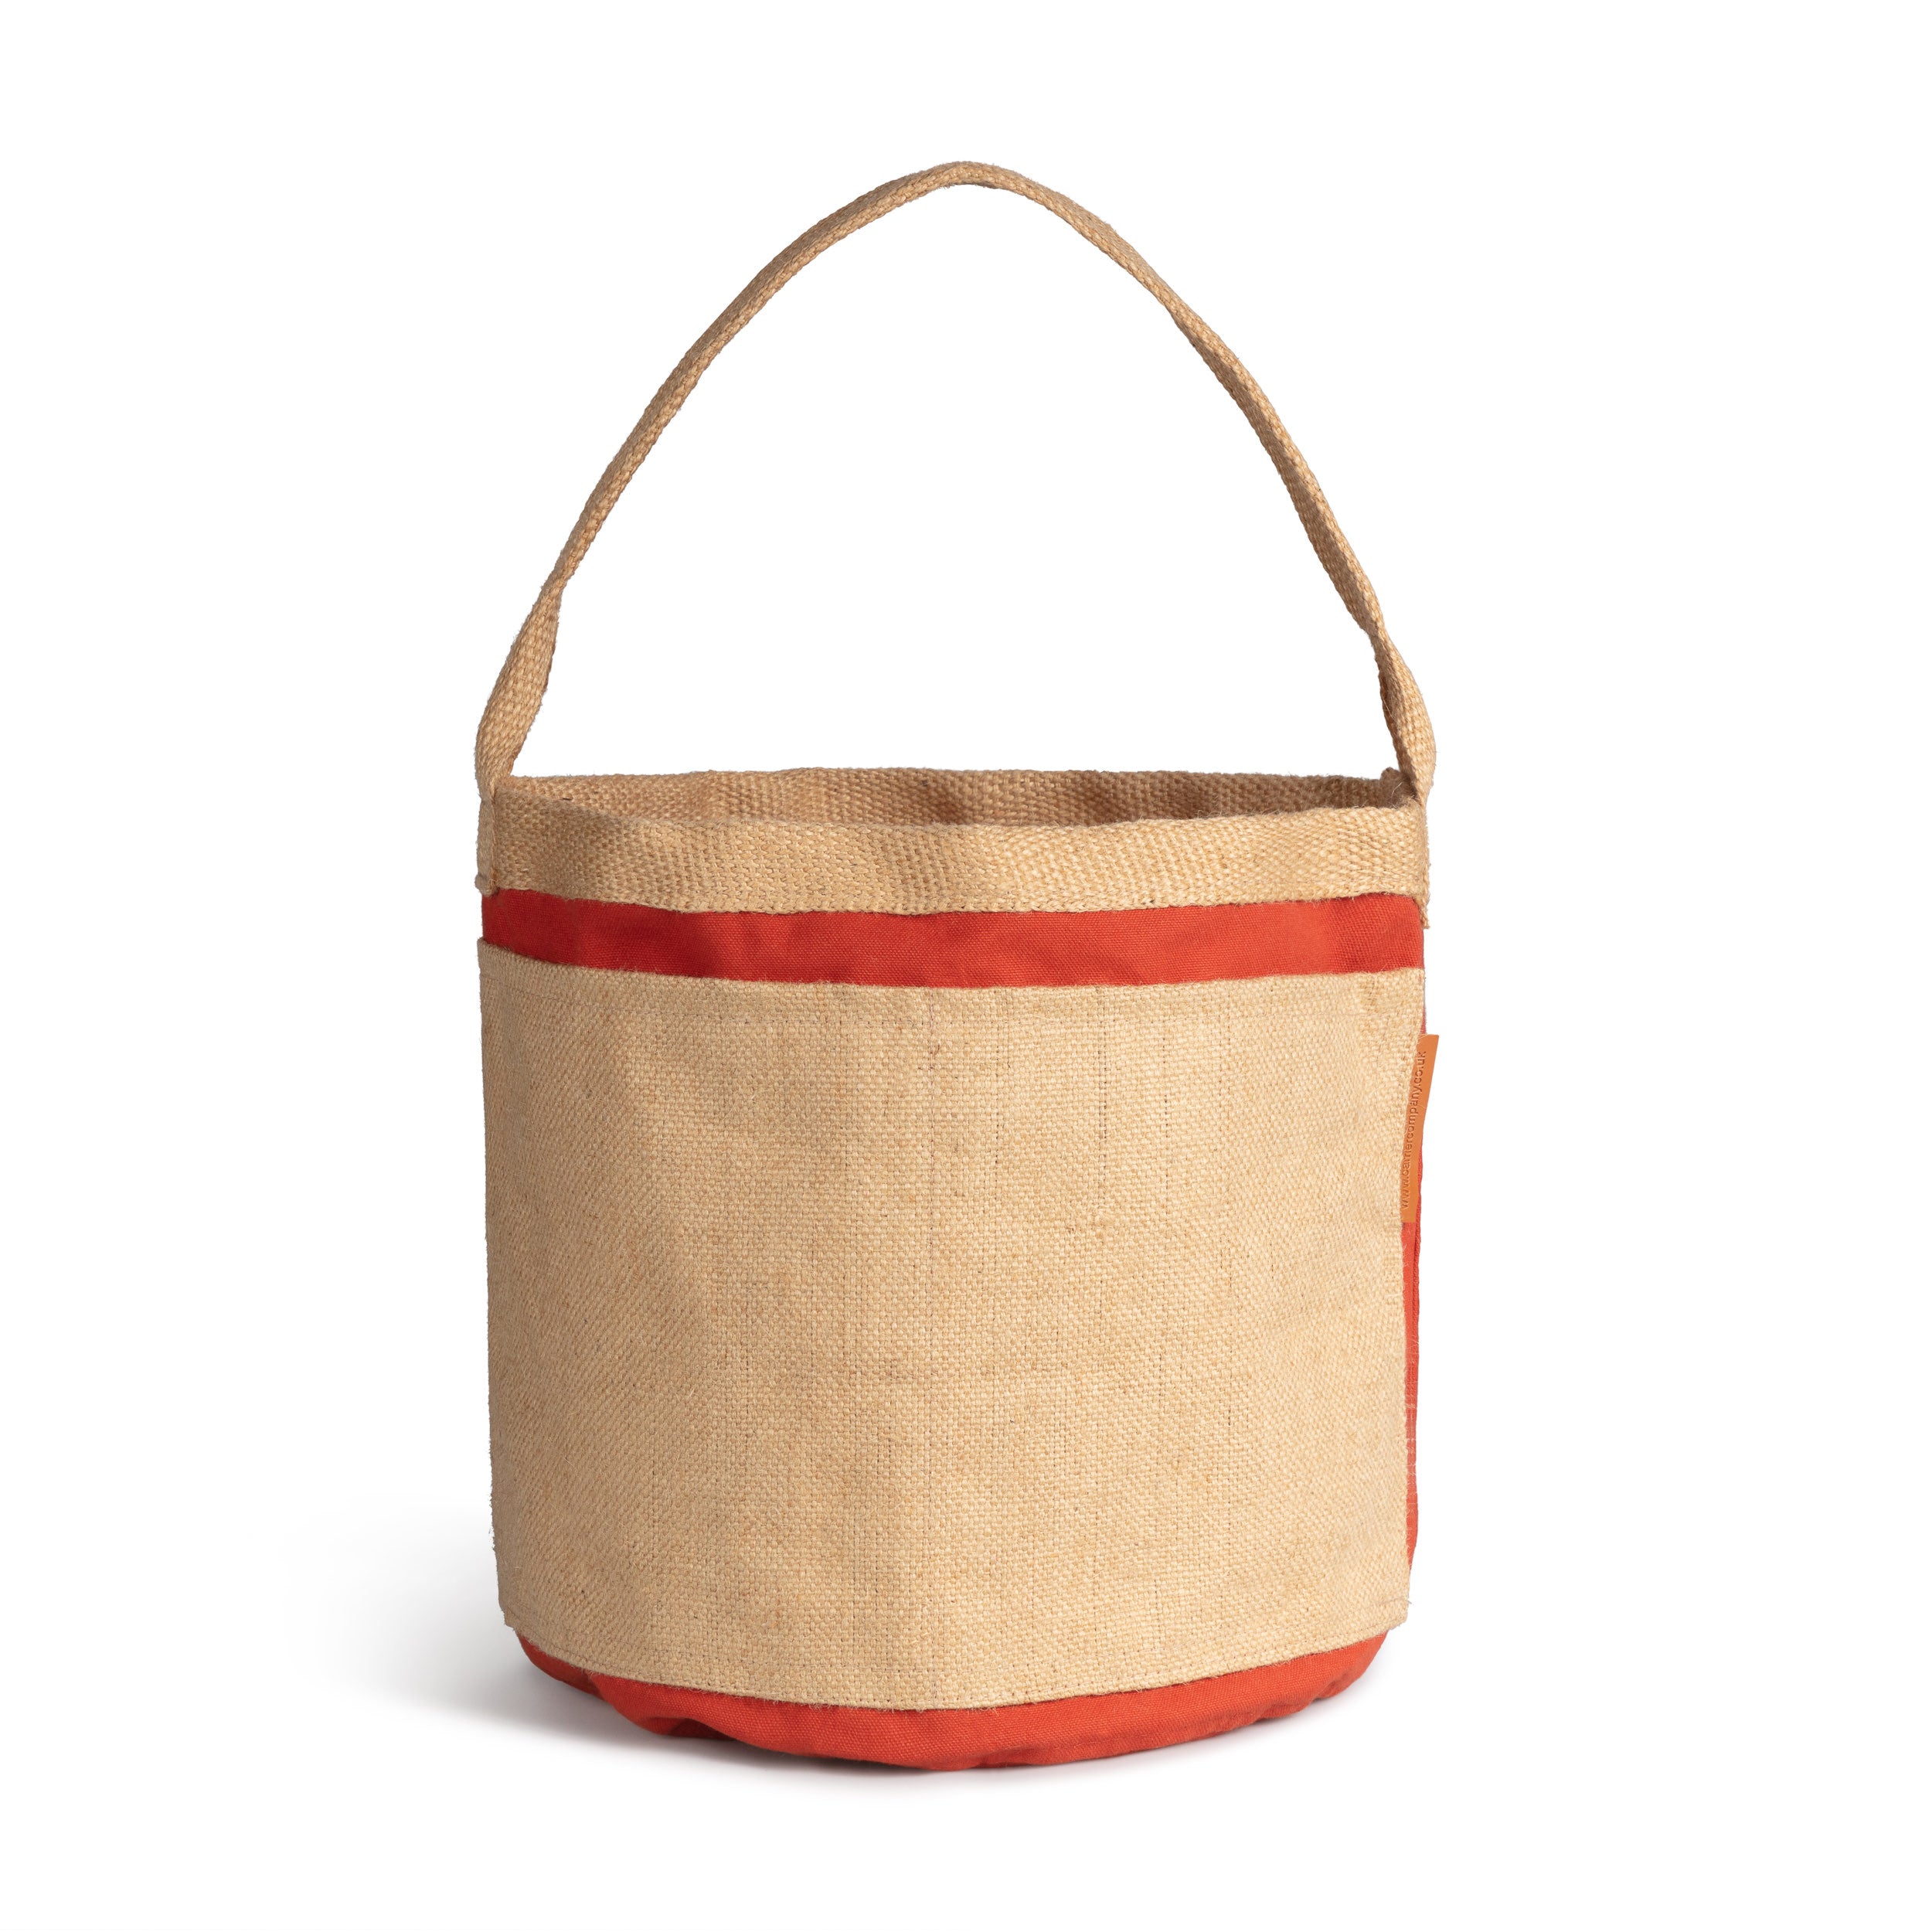 Carrier Company Gardener's Pail in Jute and Orange Canvas